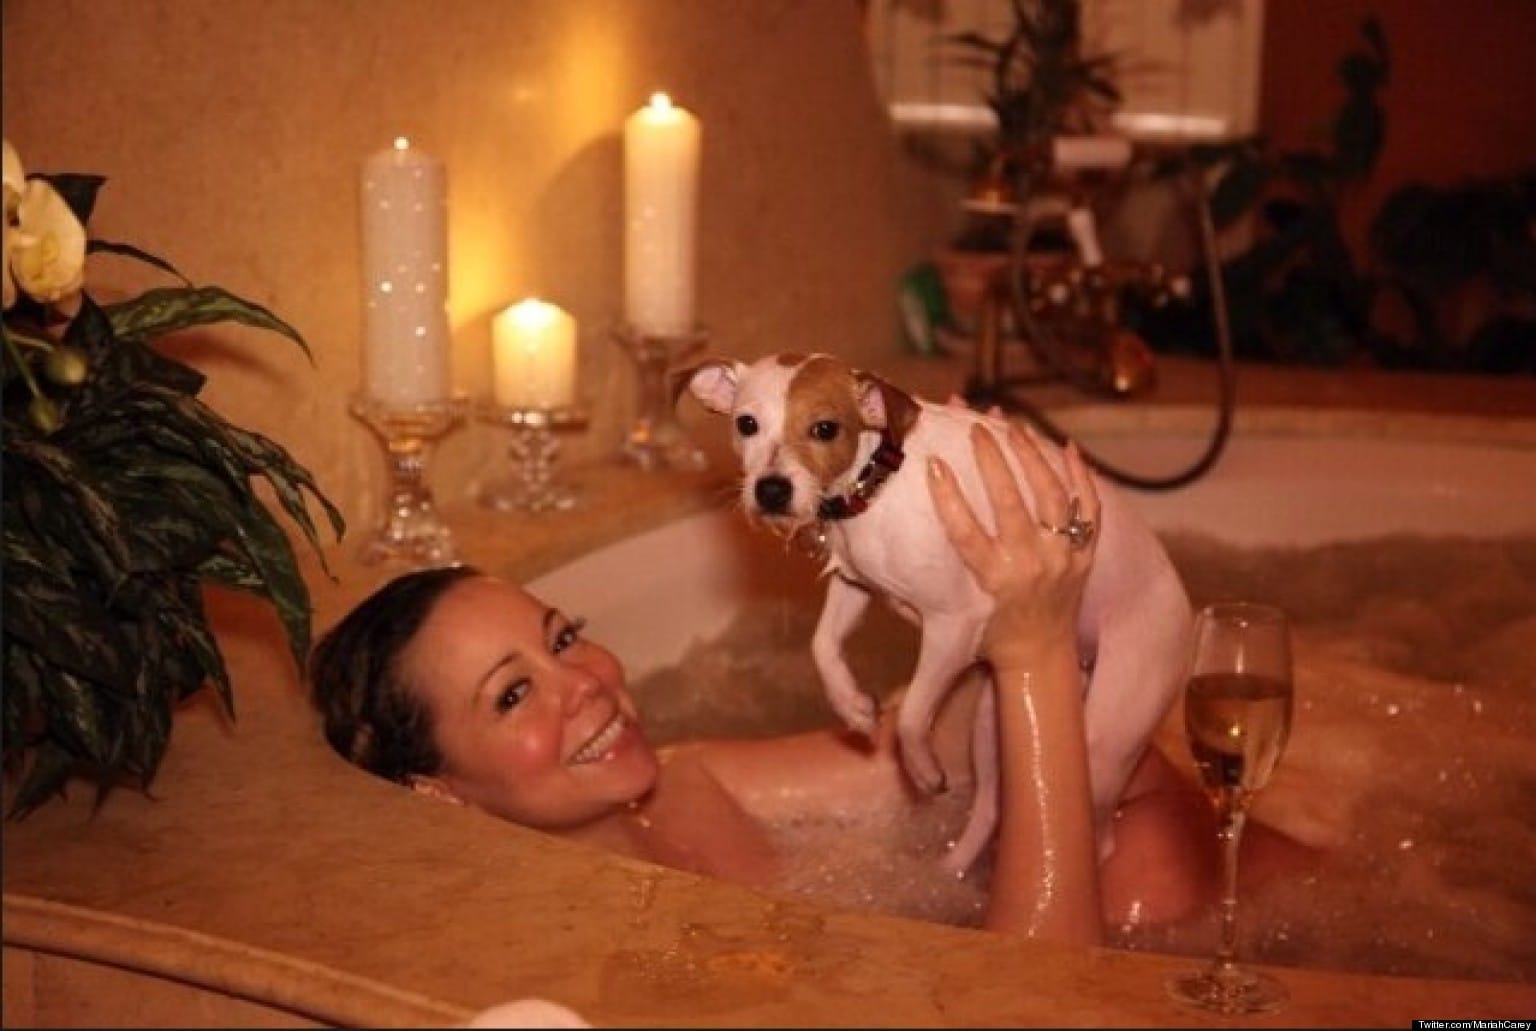 hot pic of mariah carey in her bathtub naked holding up her puppy